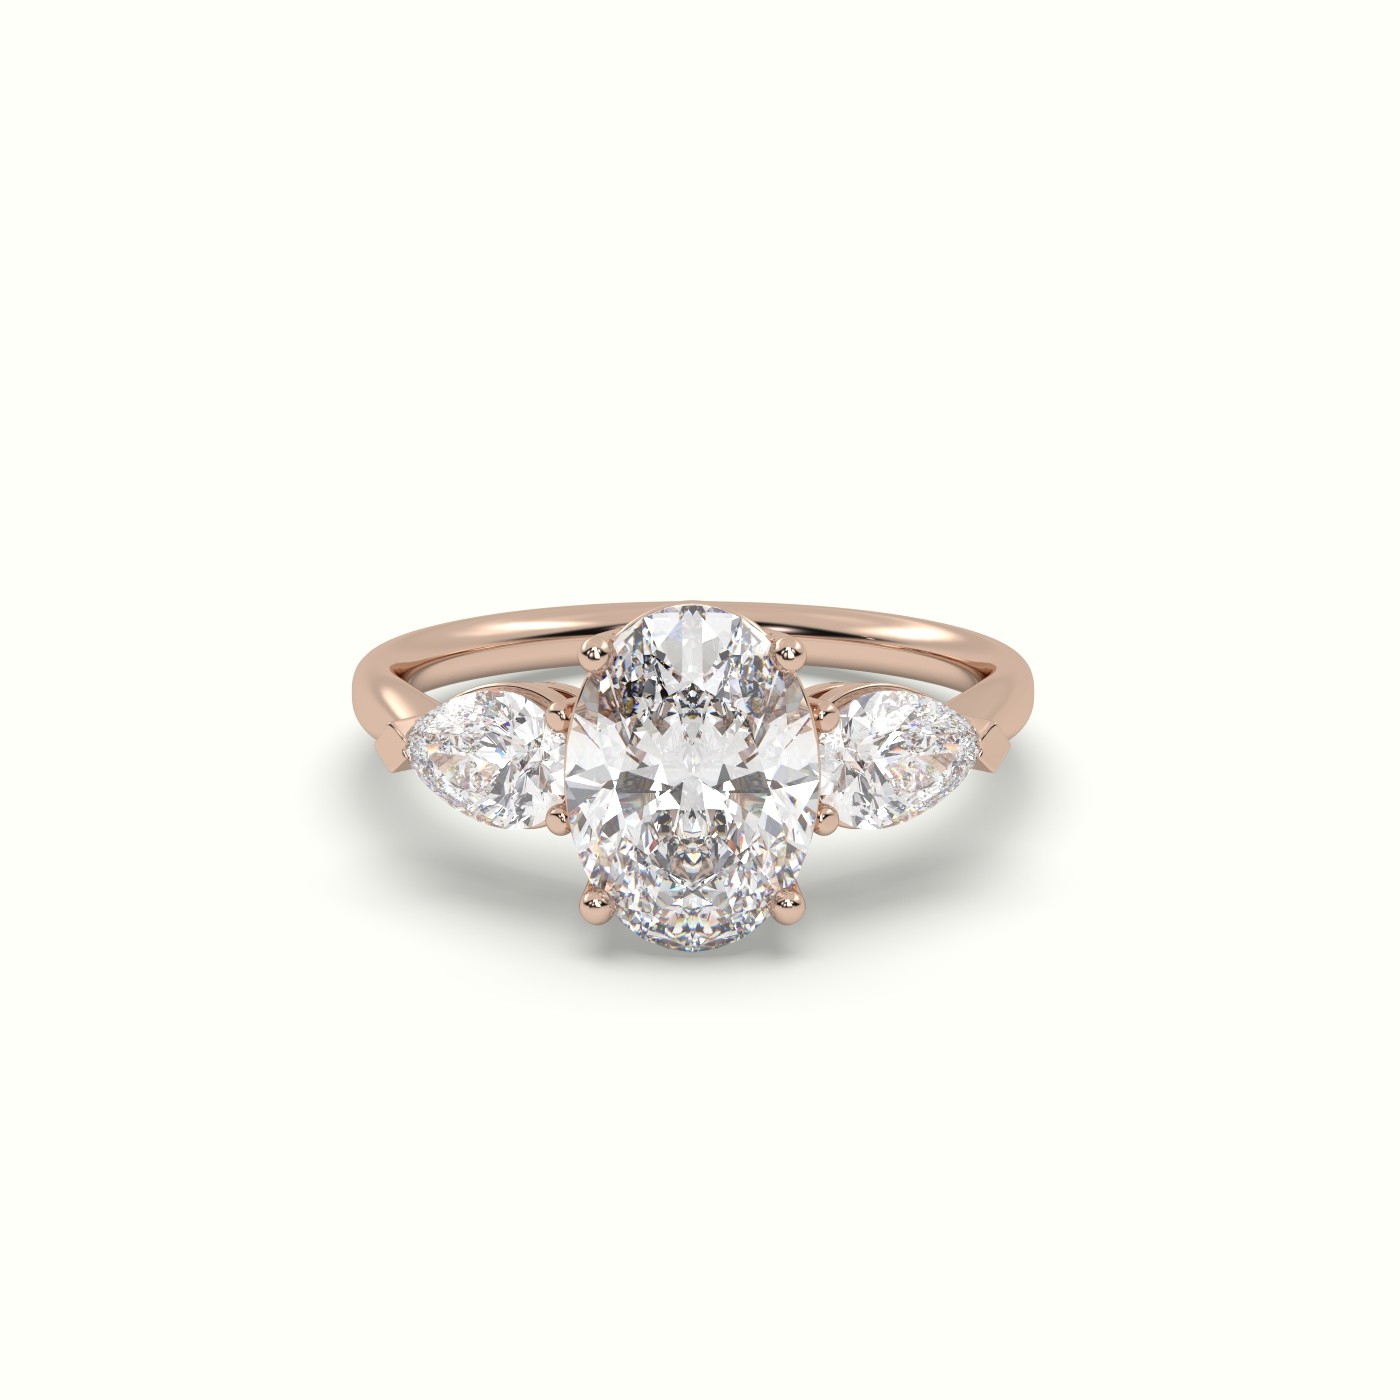 18K ROSE GOLD Oval Diamond 4 round prongs Trilogy Ring pear shape side stone | Precious Jewels Antwerp